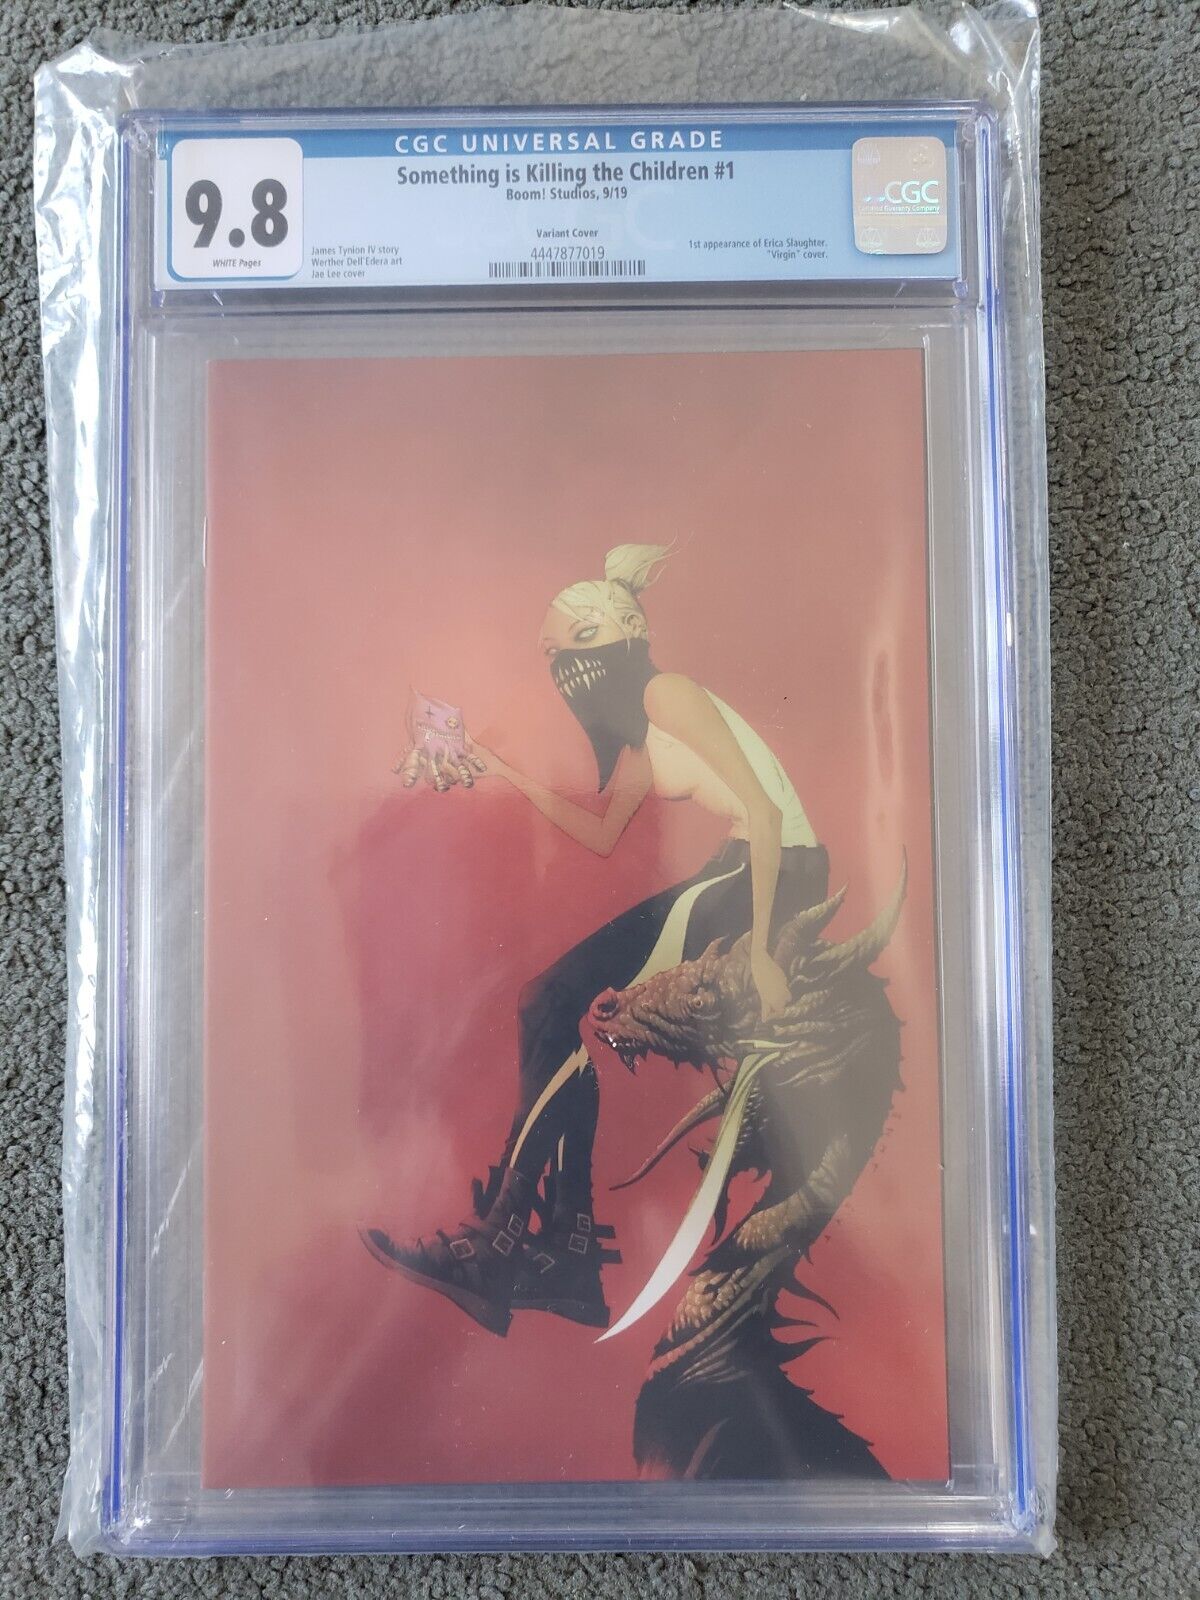 Something is Killing the Children #1 CGC 9.8 first print variant Boom Studios